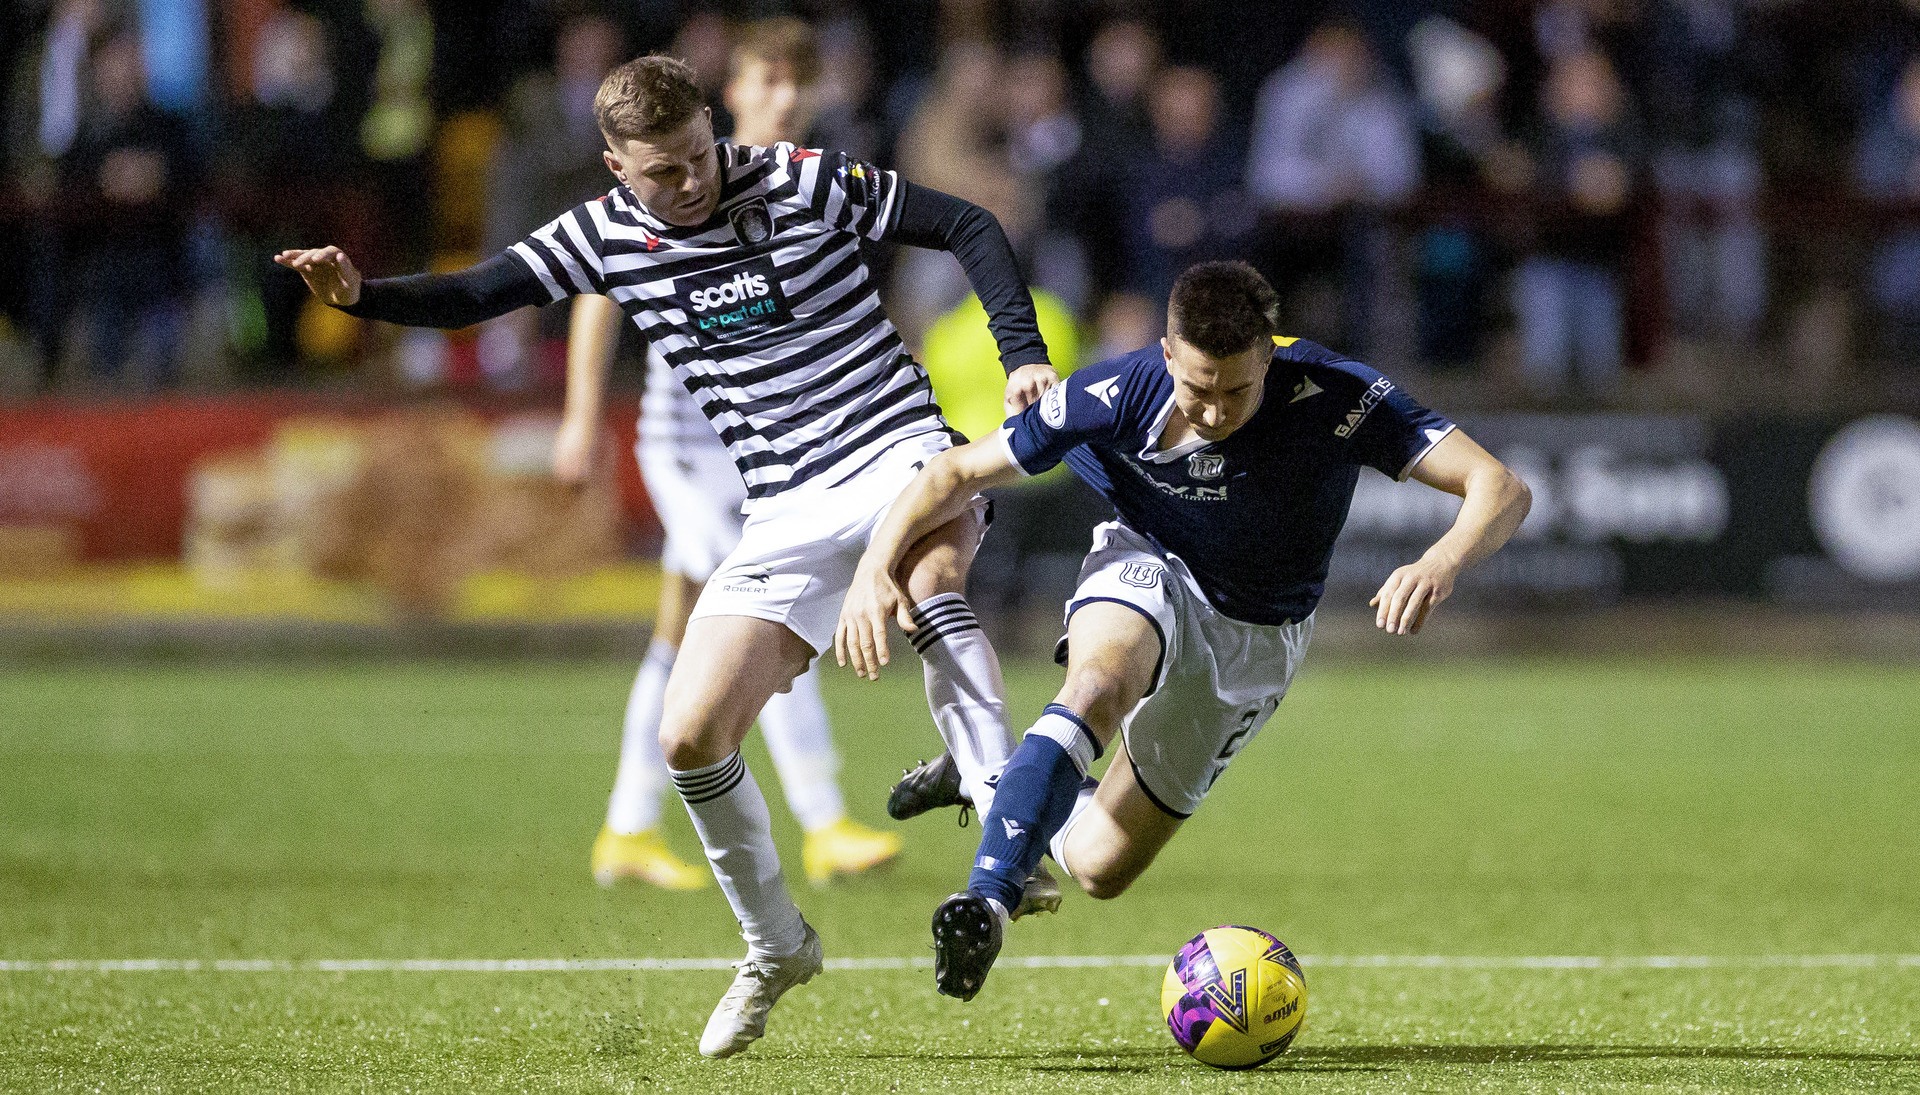 Either Dundee or Queen's Park will win the Championship on Friday evening. (Photo by Roddy Scott / SNS Group)